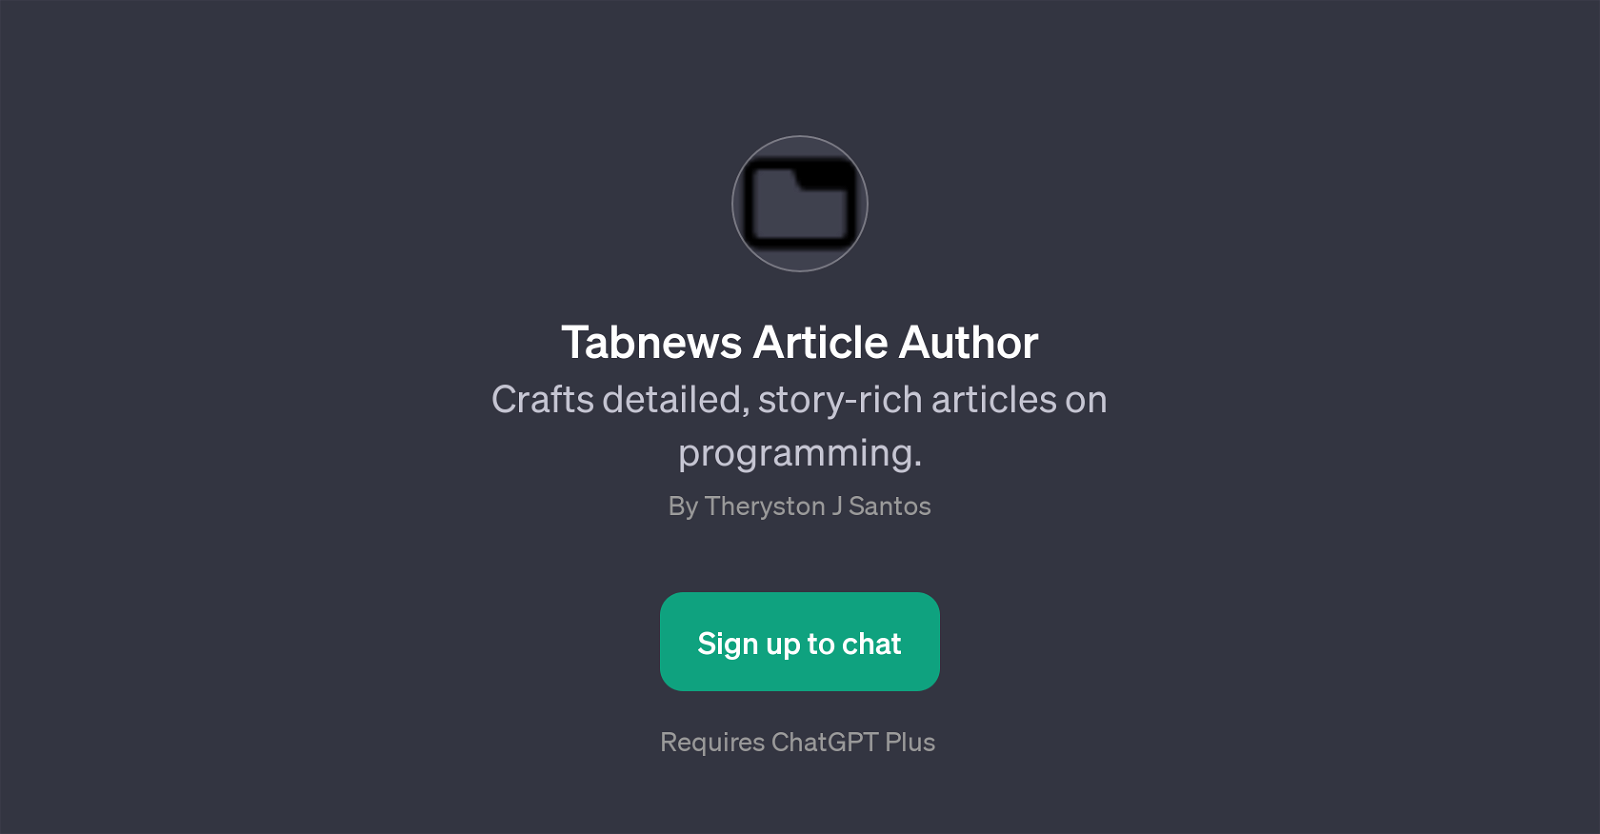 Tabnews Article Author website